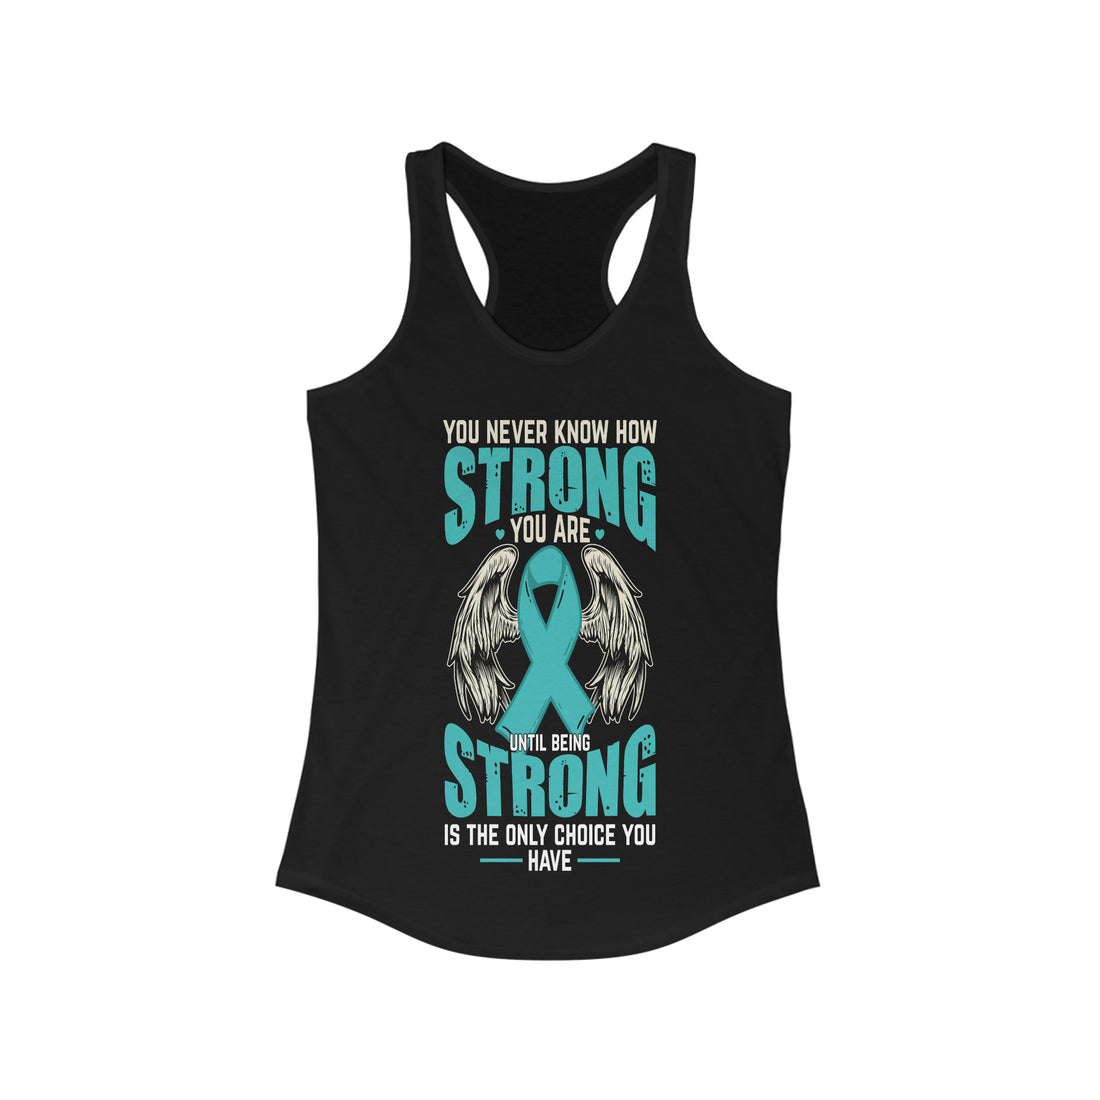 You Never Know How Strong You Are - Racerback Tank Top